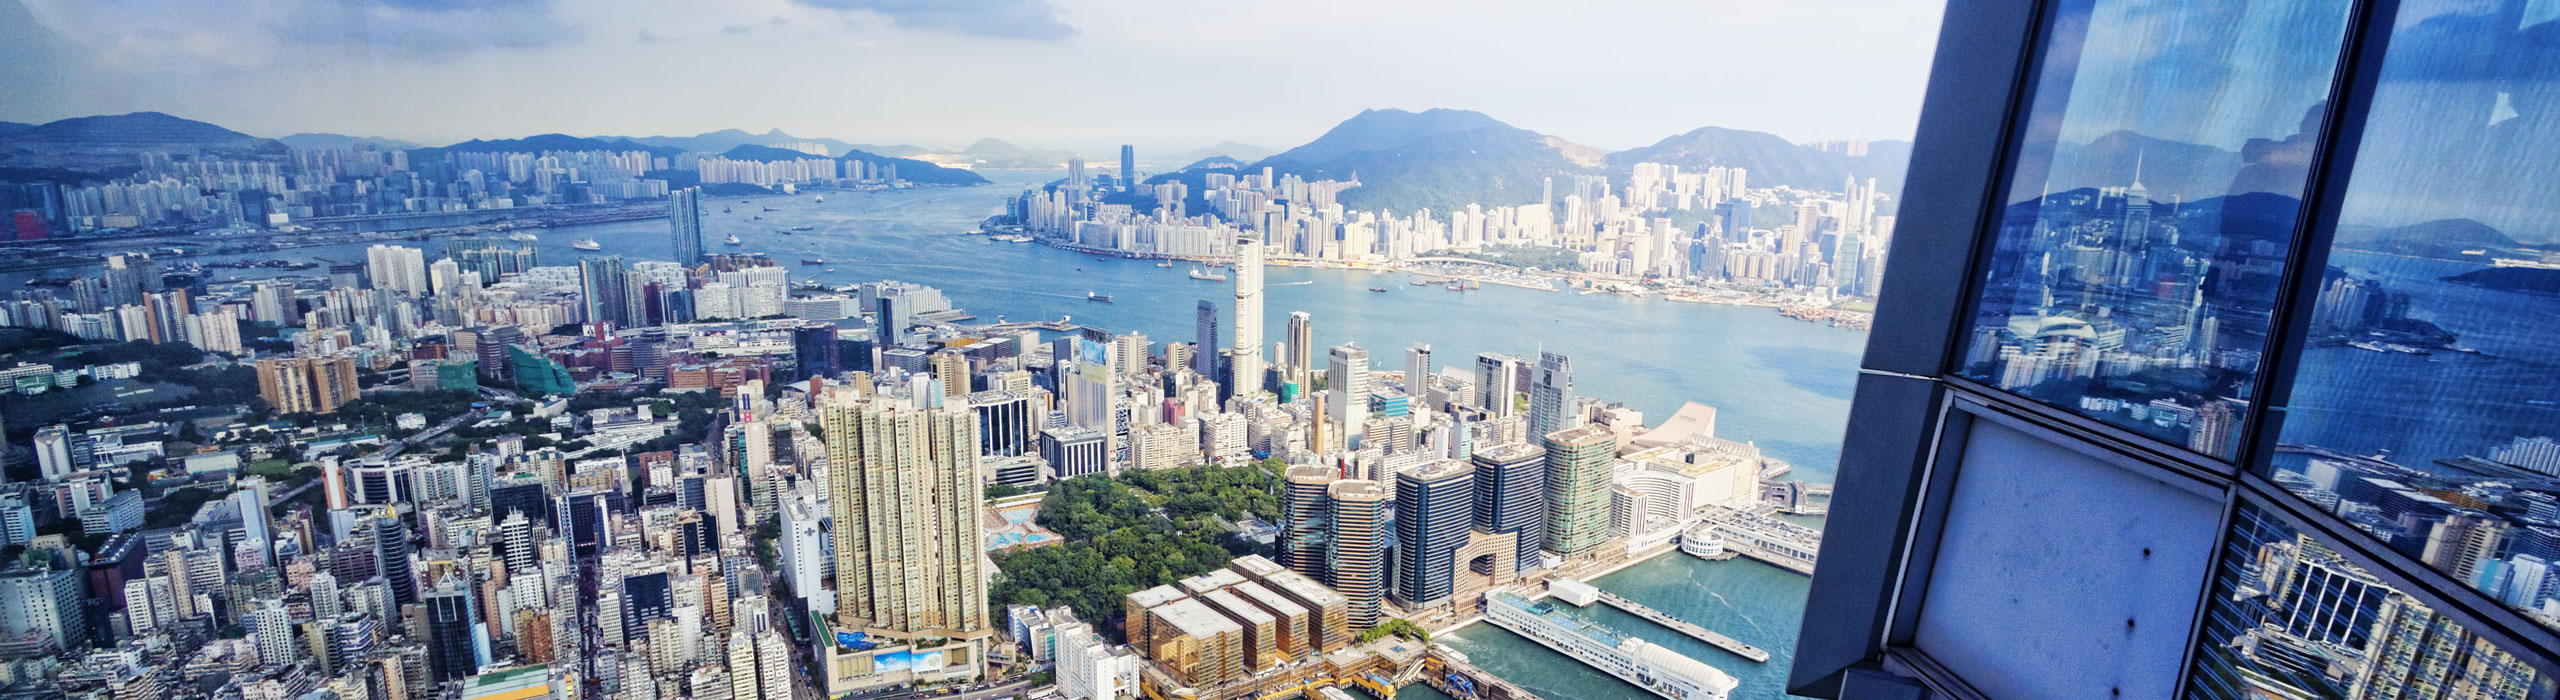 Best Hong Kong Tours And Hong Kong Day Trips To City Highlights 